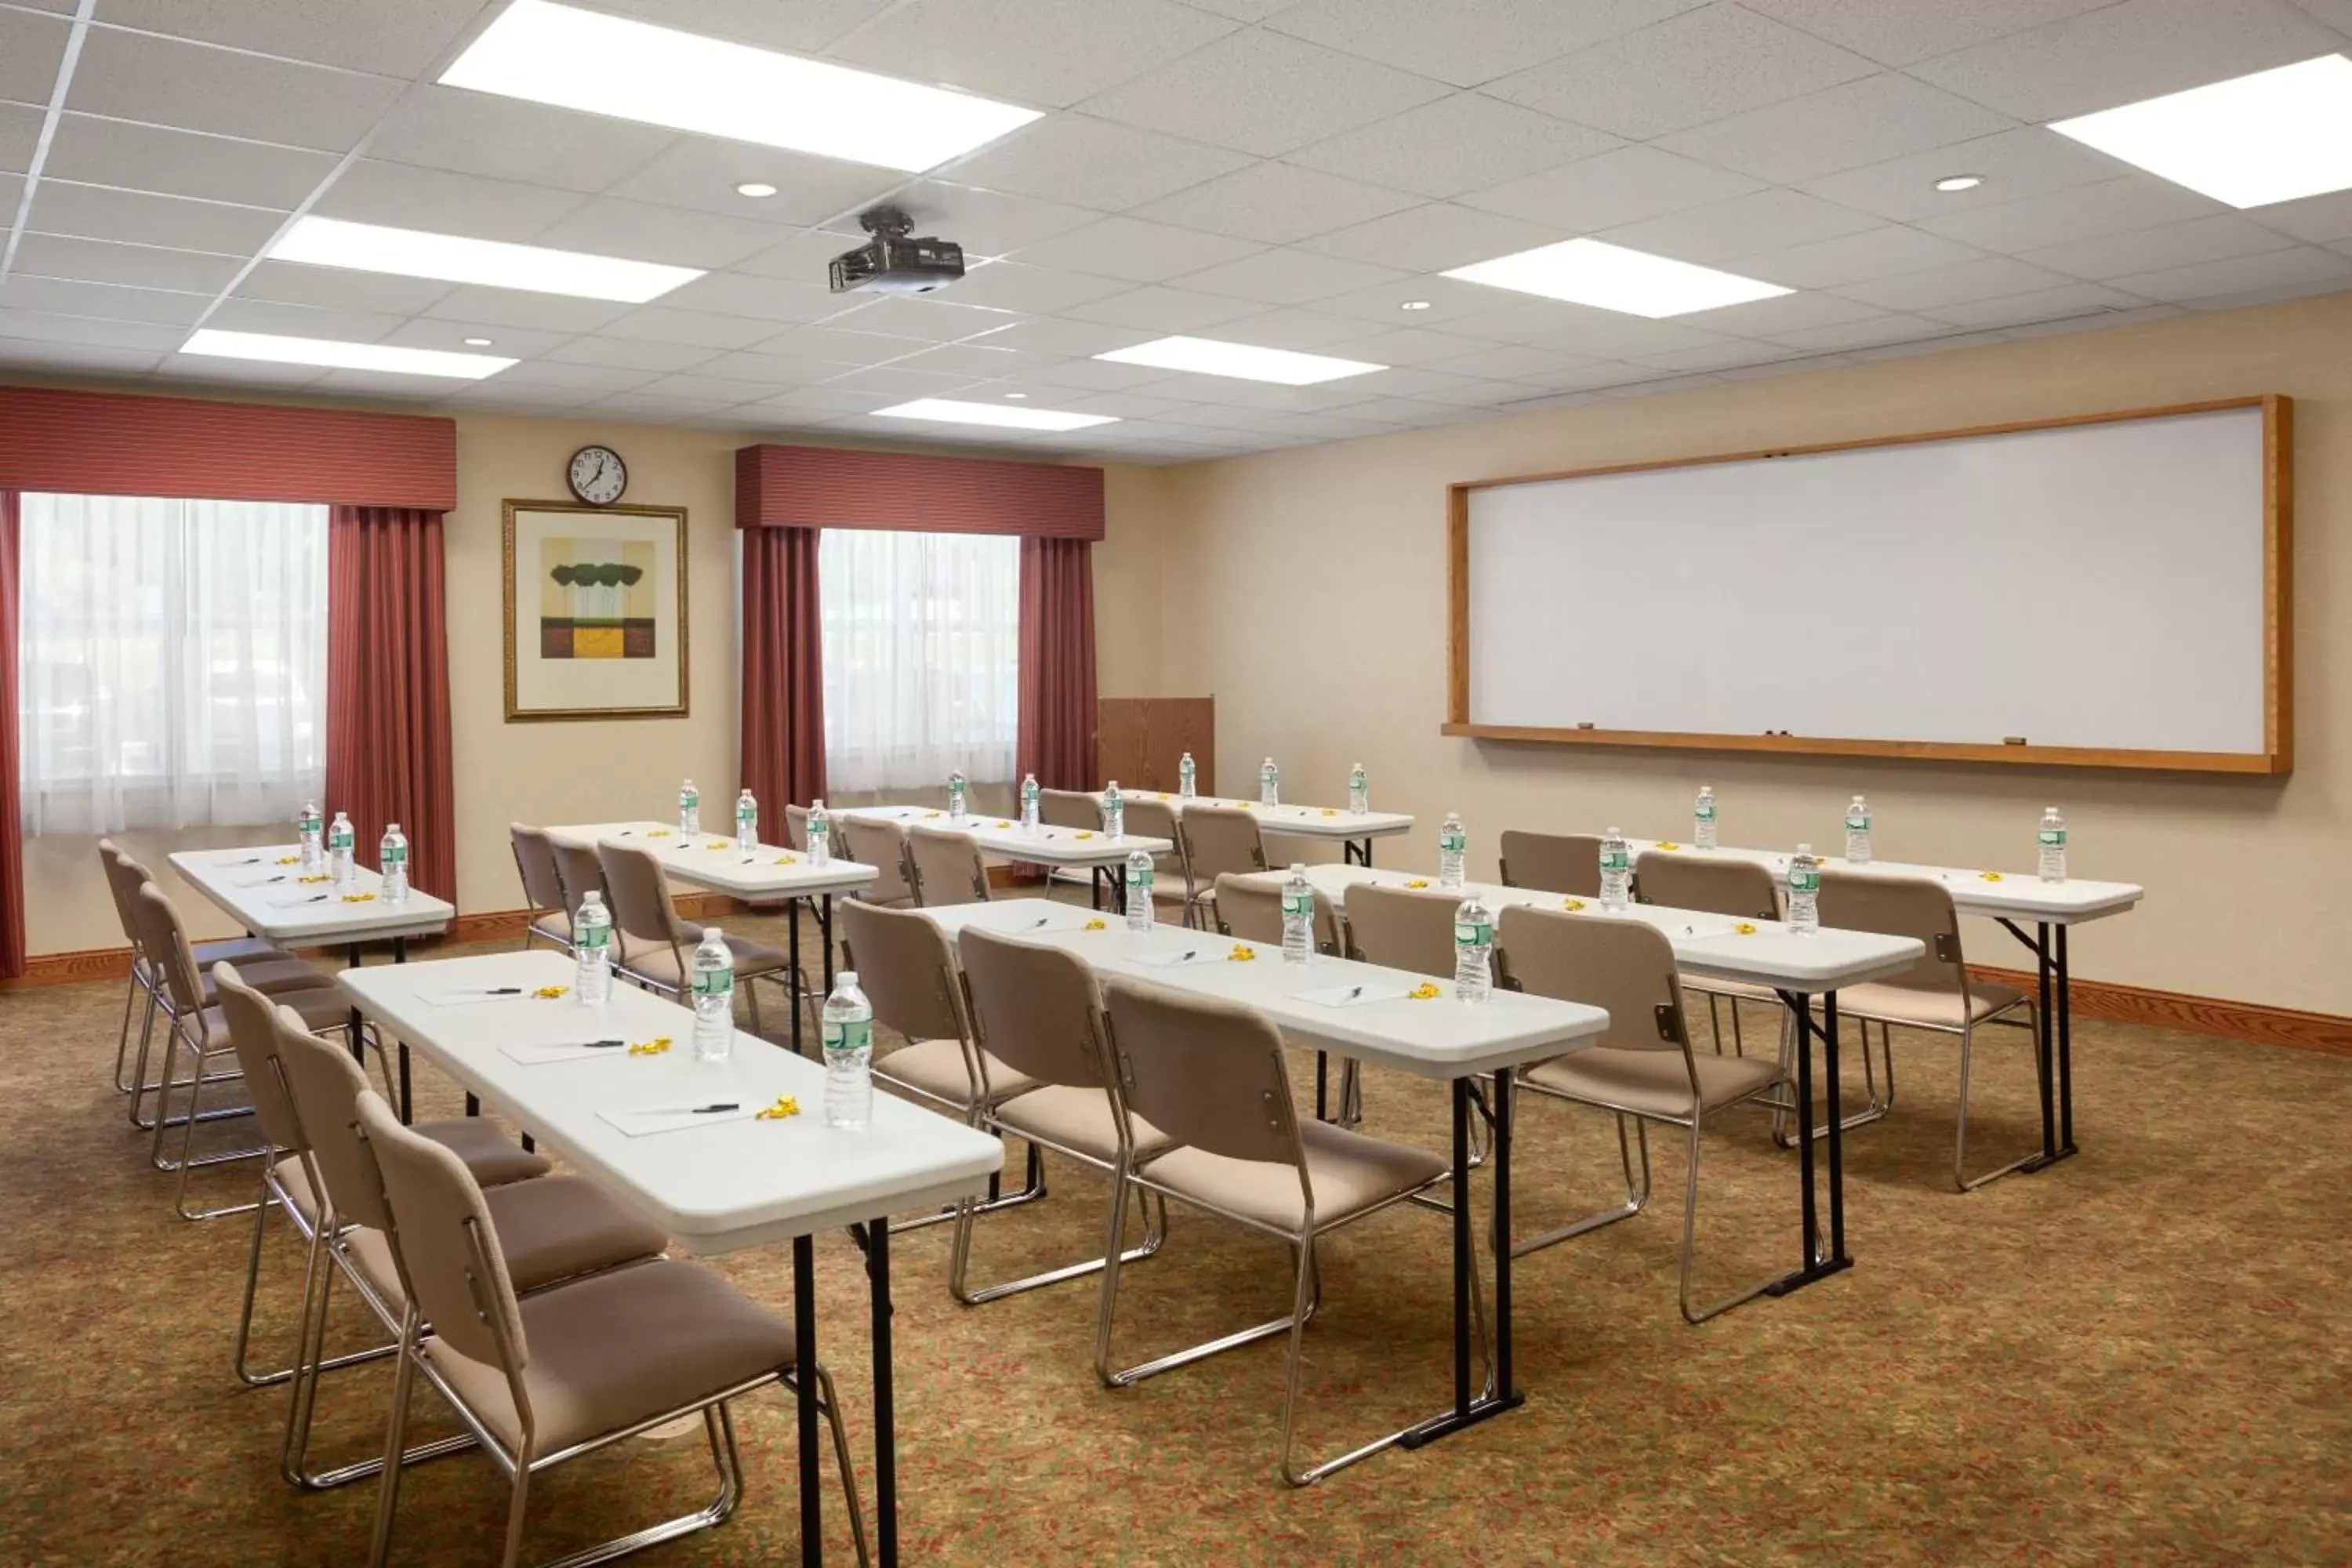 Area and facilities in Country Inn & Suites by Radisson, Ithaca, NY